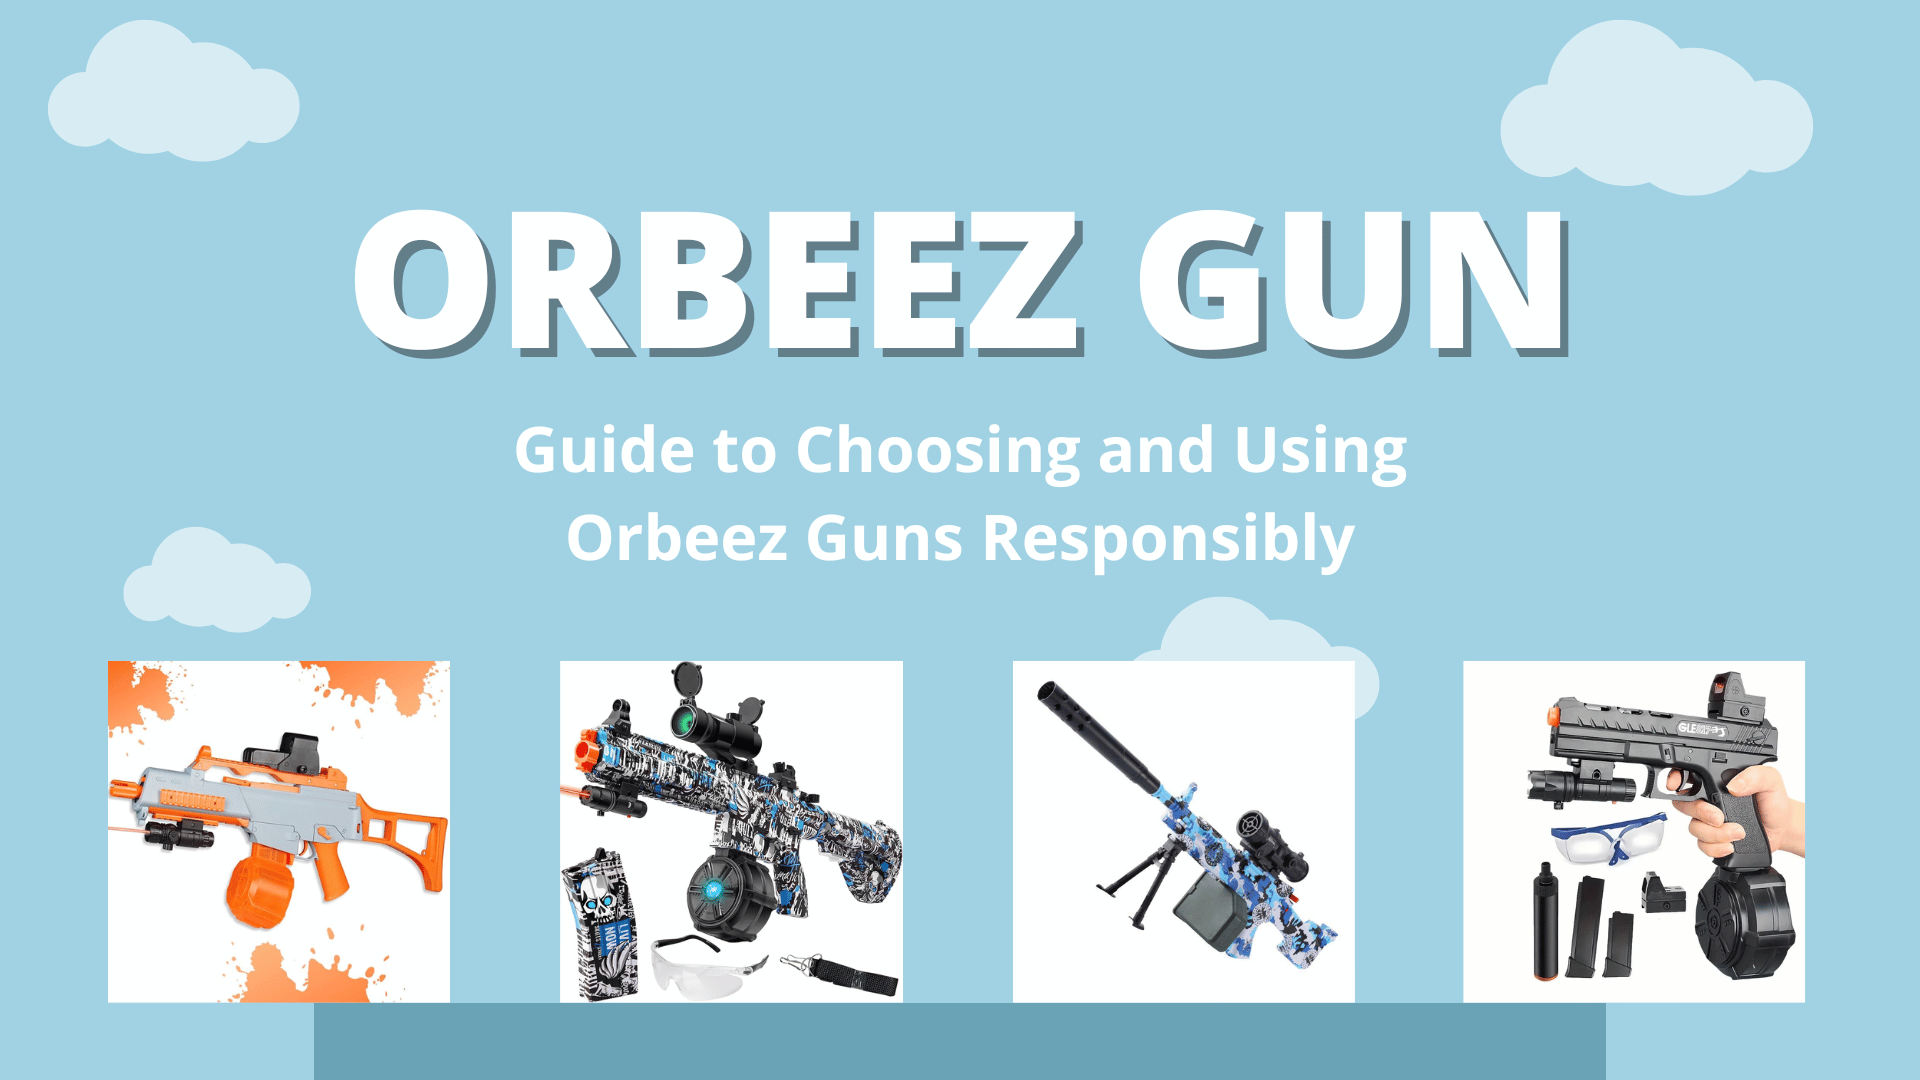 Orbeez Gun: What is Orbeez Gun? Guide to Choosing and Using Orbeez Guns Responsibly